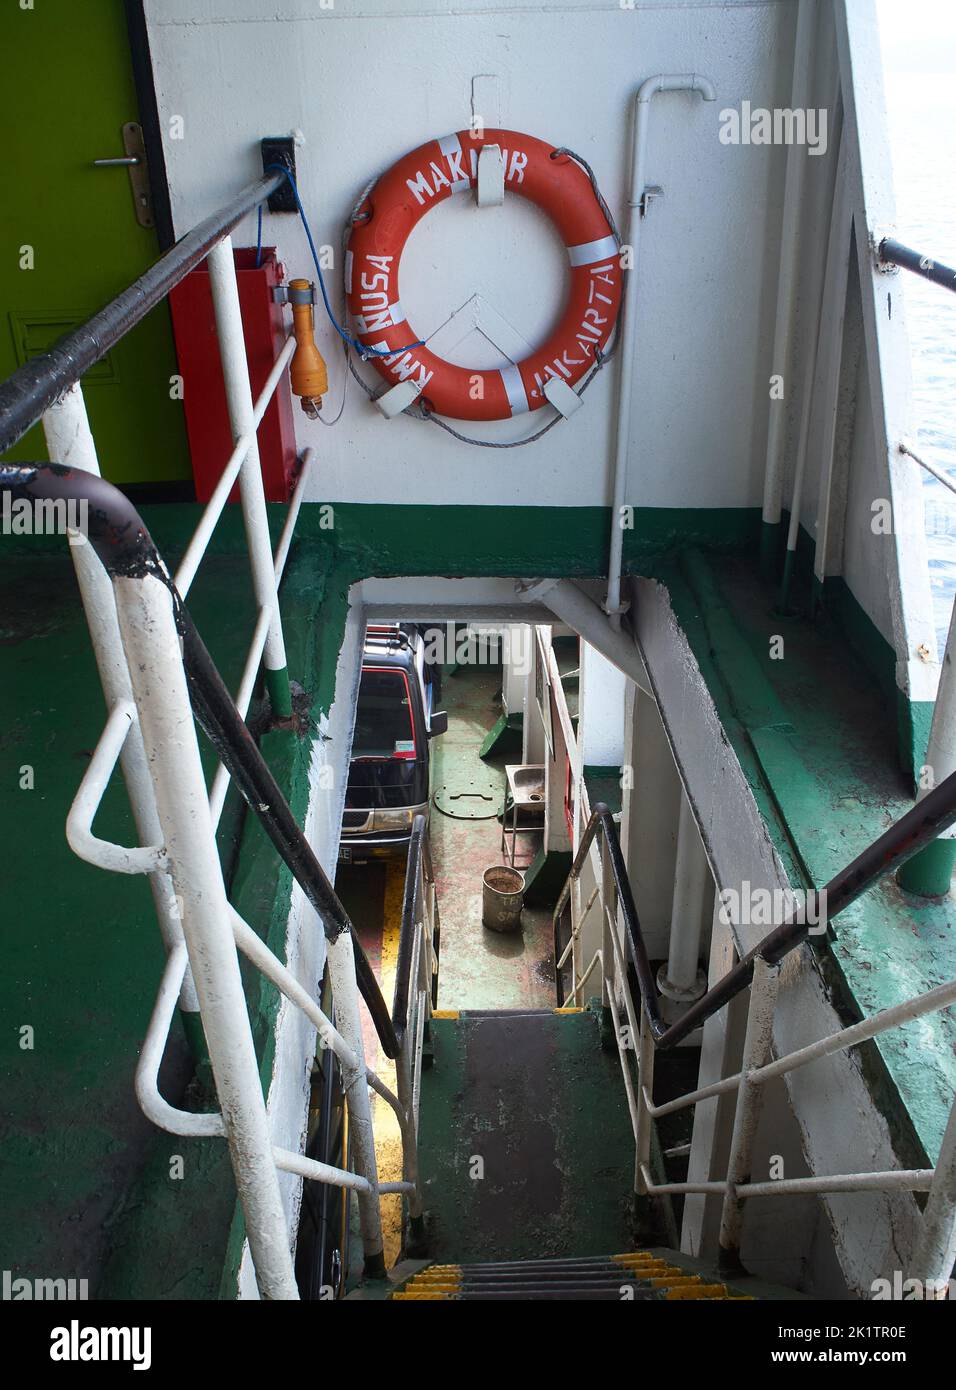 A lifebuoy hanging on a ladder in a ferry. Stock Photo